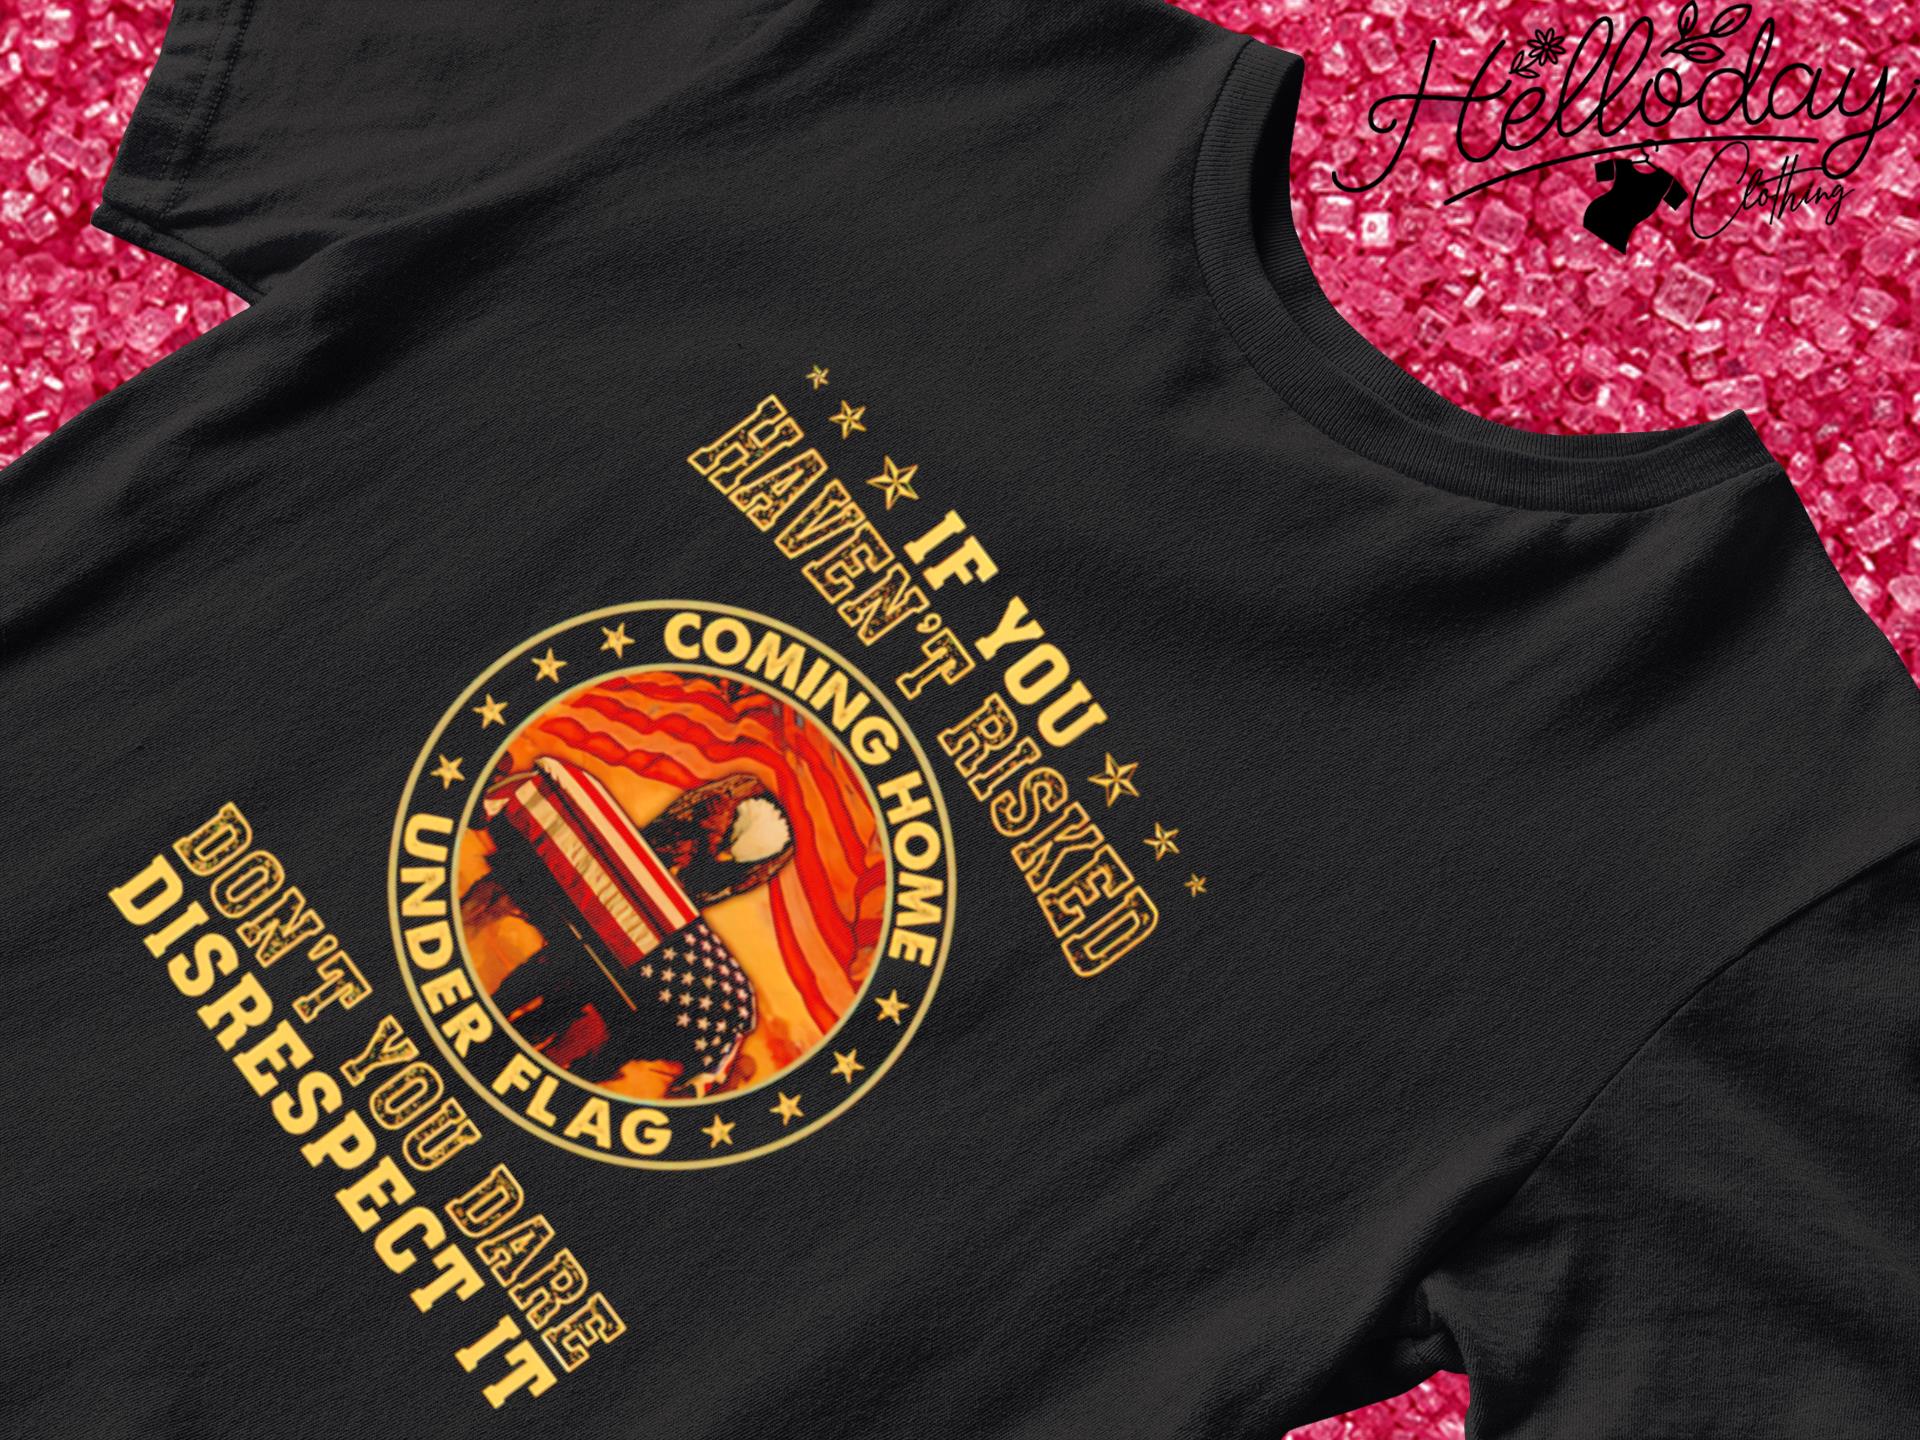 If you haven't risked coming home under flag Eagle shirt